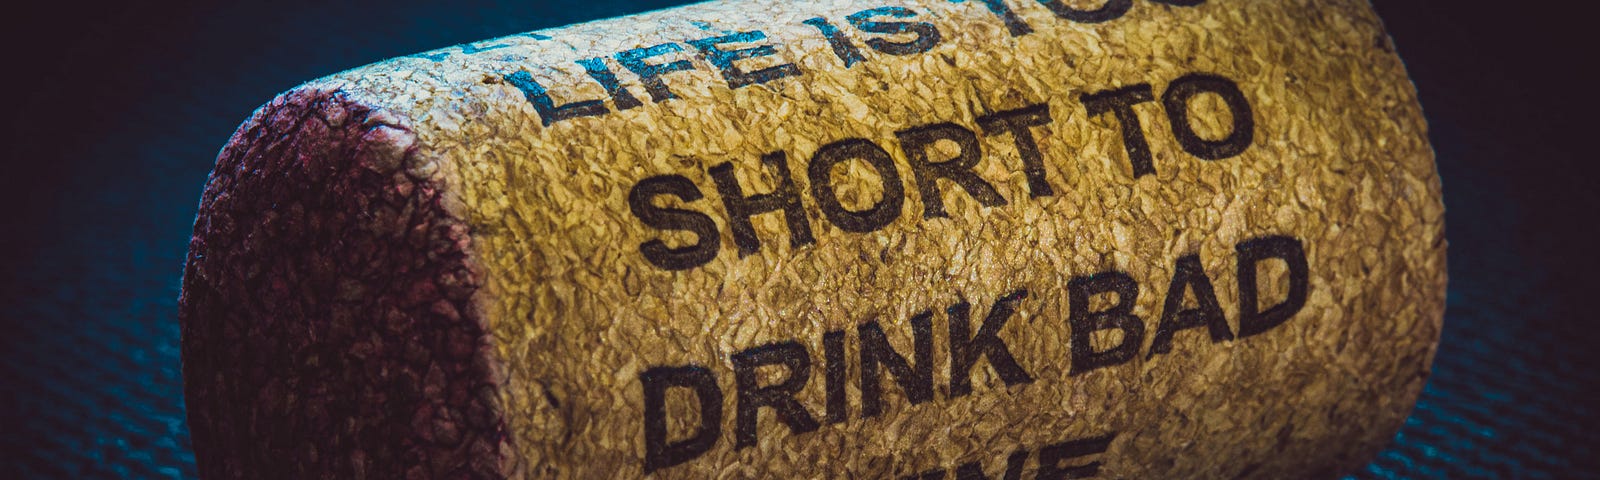 Wine cork that says “Life is too short to drink bad wine.”